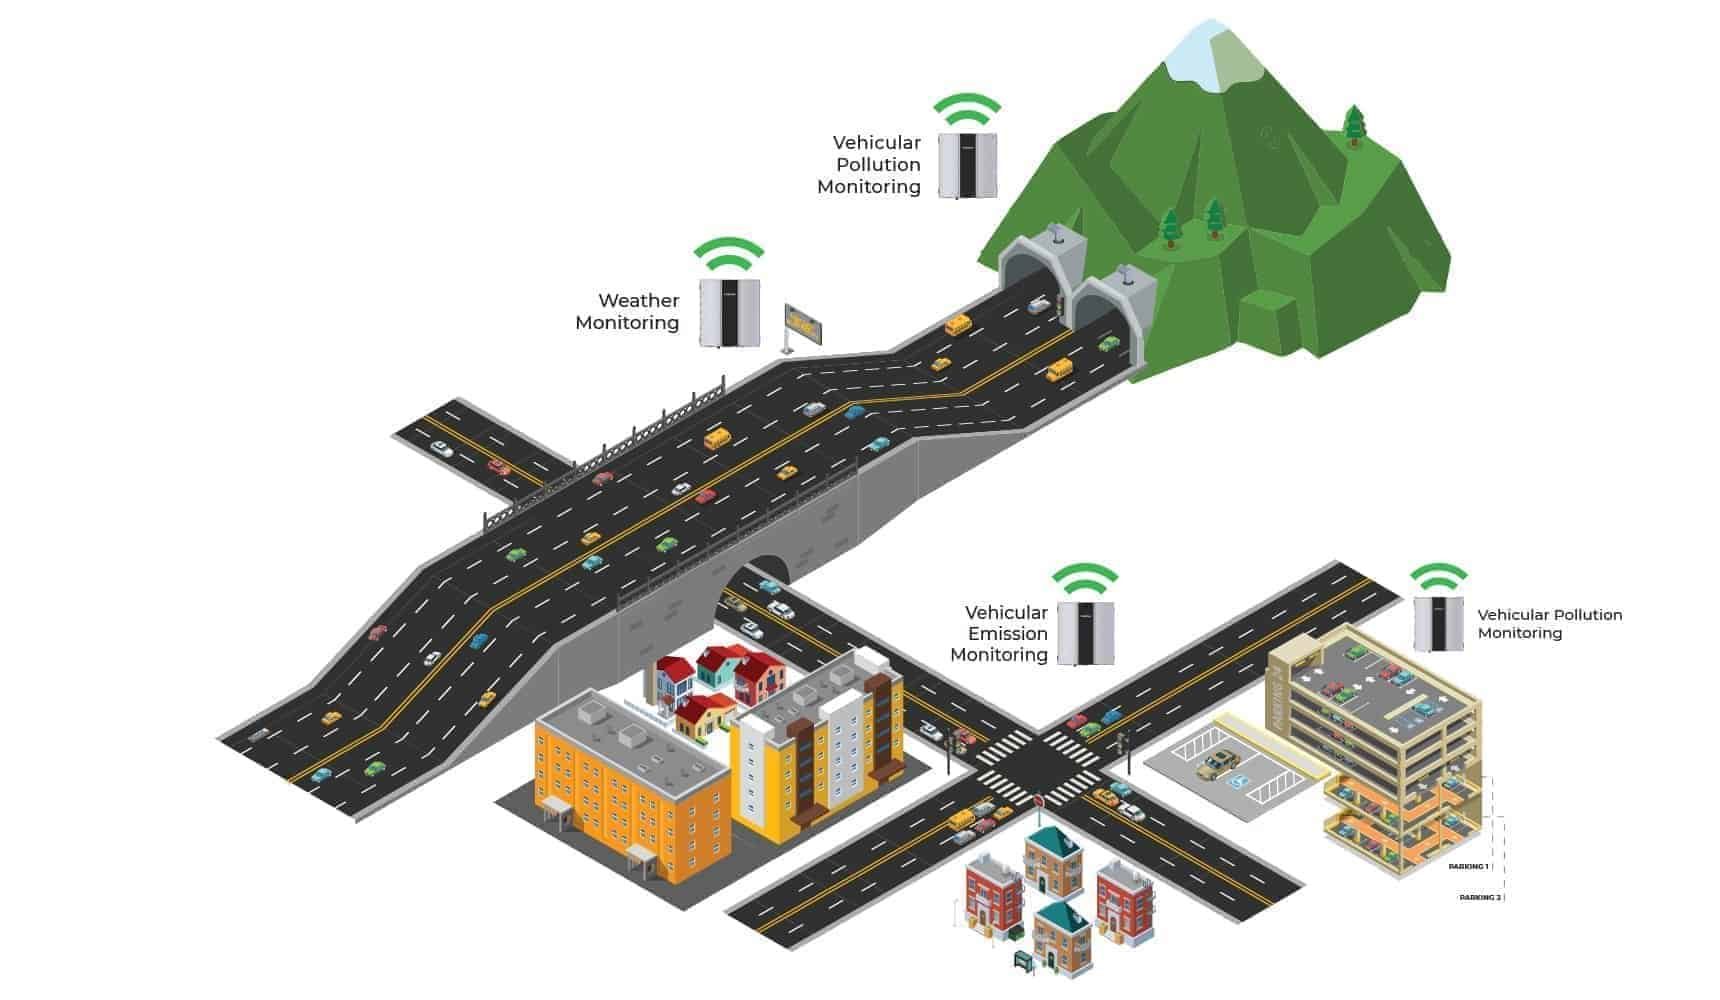 Roadside air pollution monitoring at tunnels assist in mitigation and reducing accidents